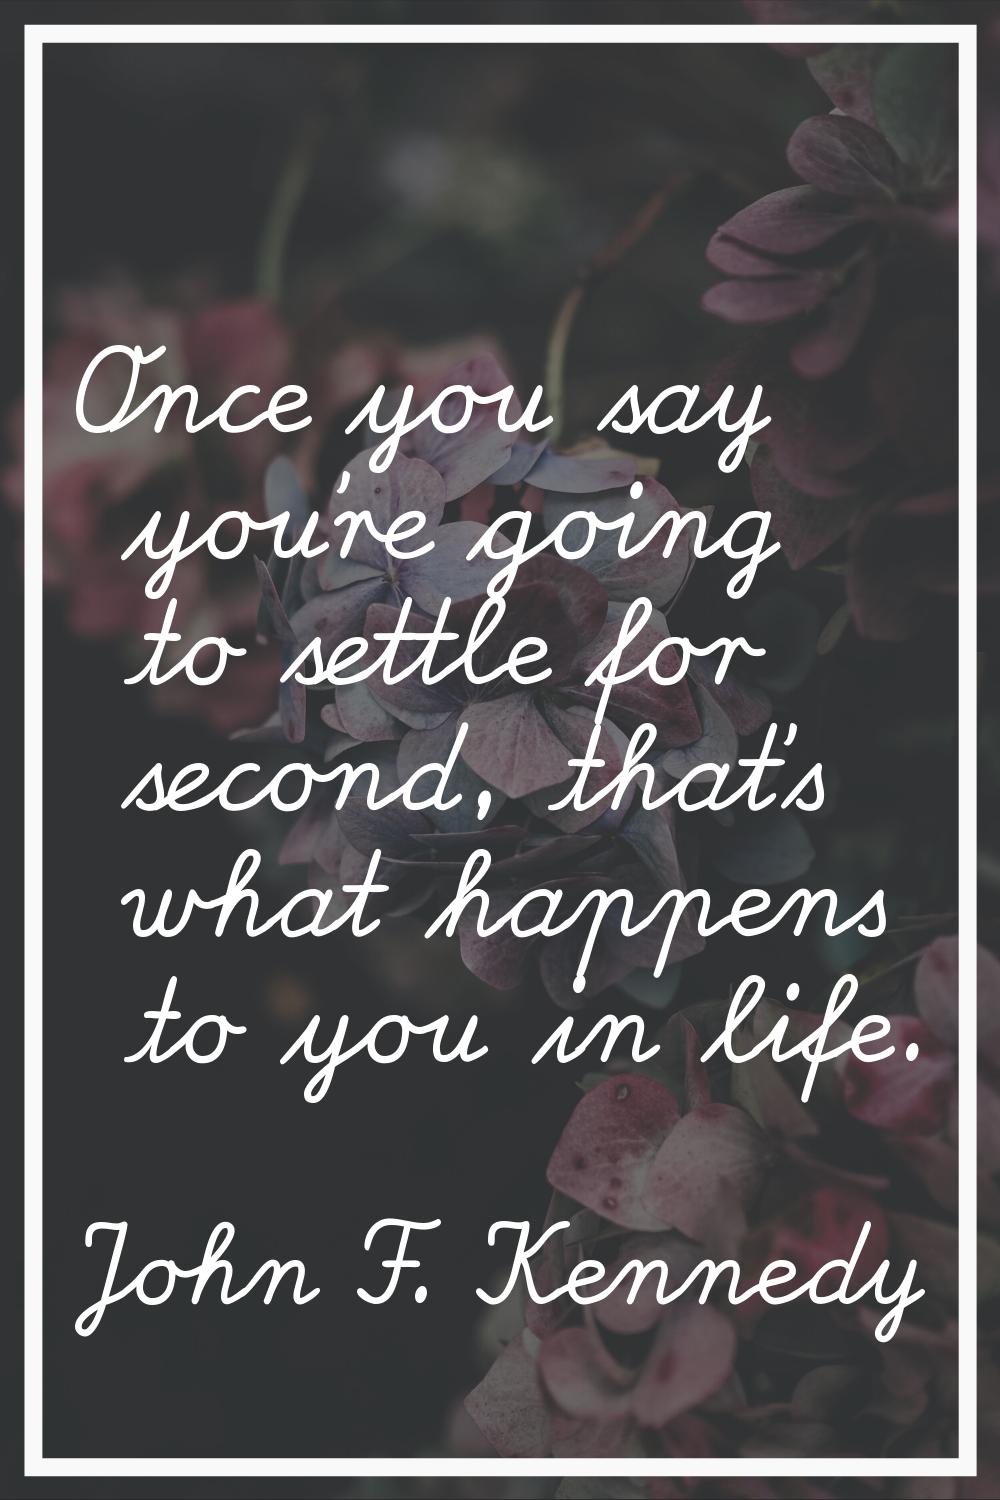 Once you say you're going to settle for second, that's what happens to you in life.